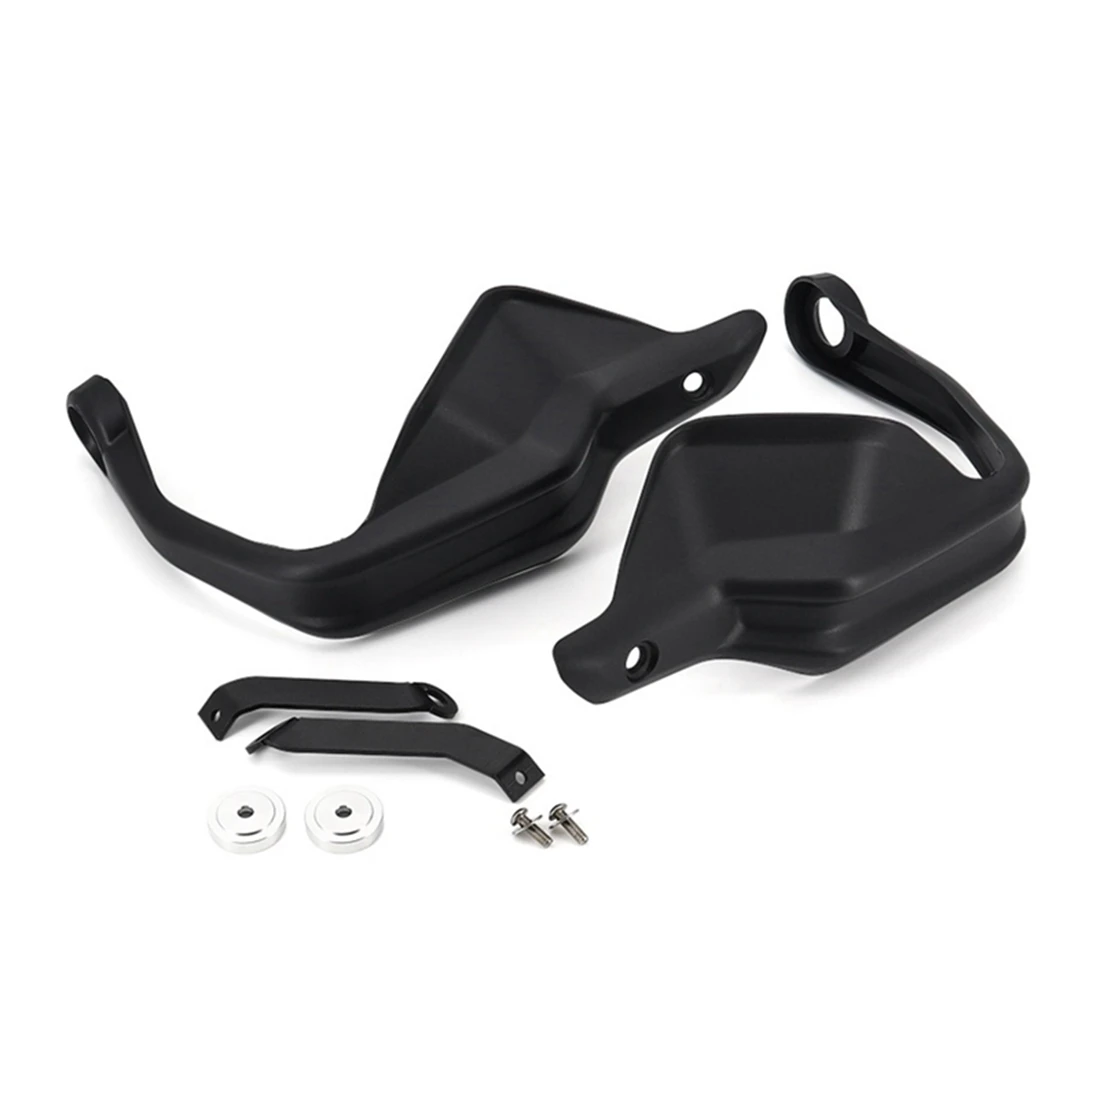 Motorcycle Handguard for Motron XNord X Nord 125 X-Nord 125 Hand Guard Shield Protector Windshield